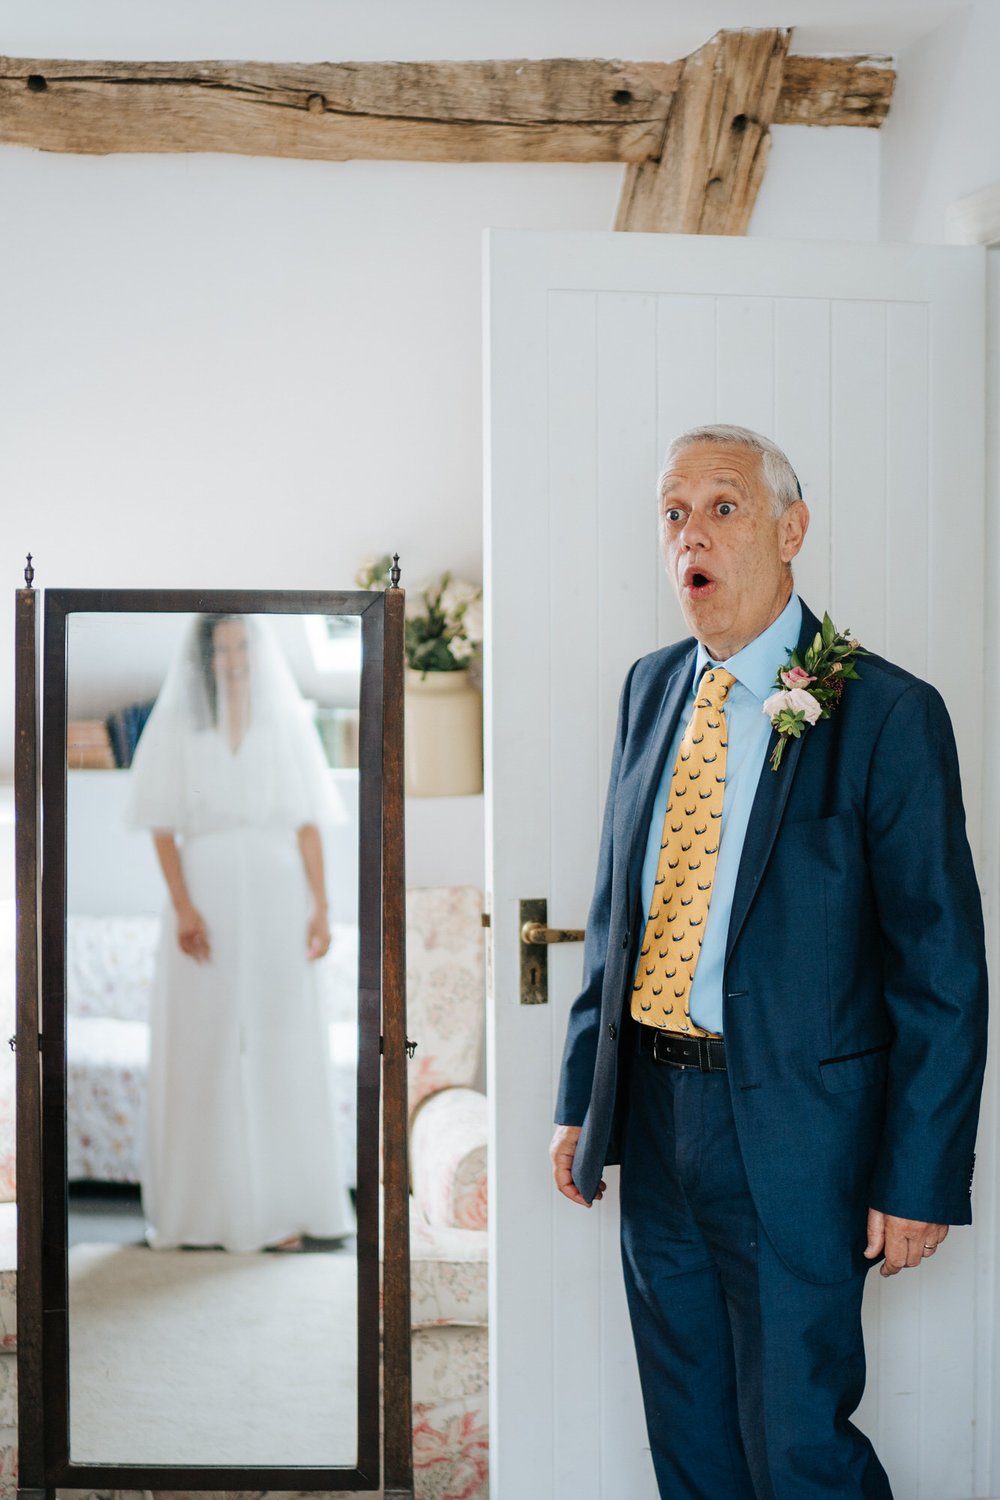 Father of the bride, with jaw on the floor, sees his daughter in her dress for the first time as the daughter can be seen, out of focus, in mirror reflection